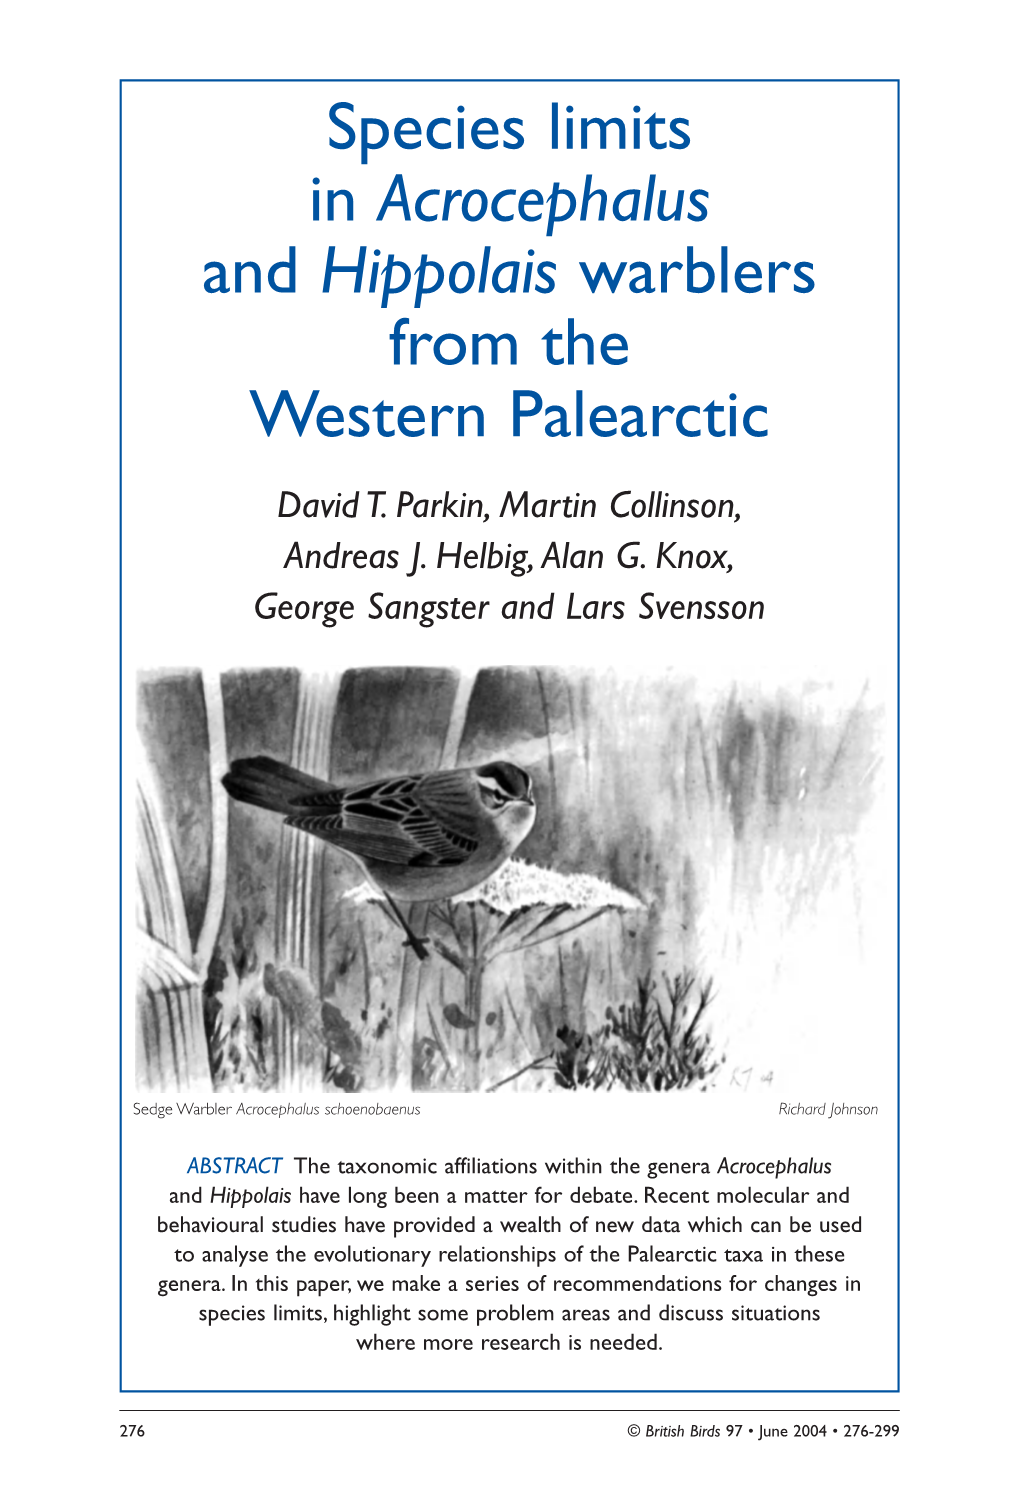 Acrocephalus and Hippolais Warblers from the Western Palearctic David T